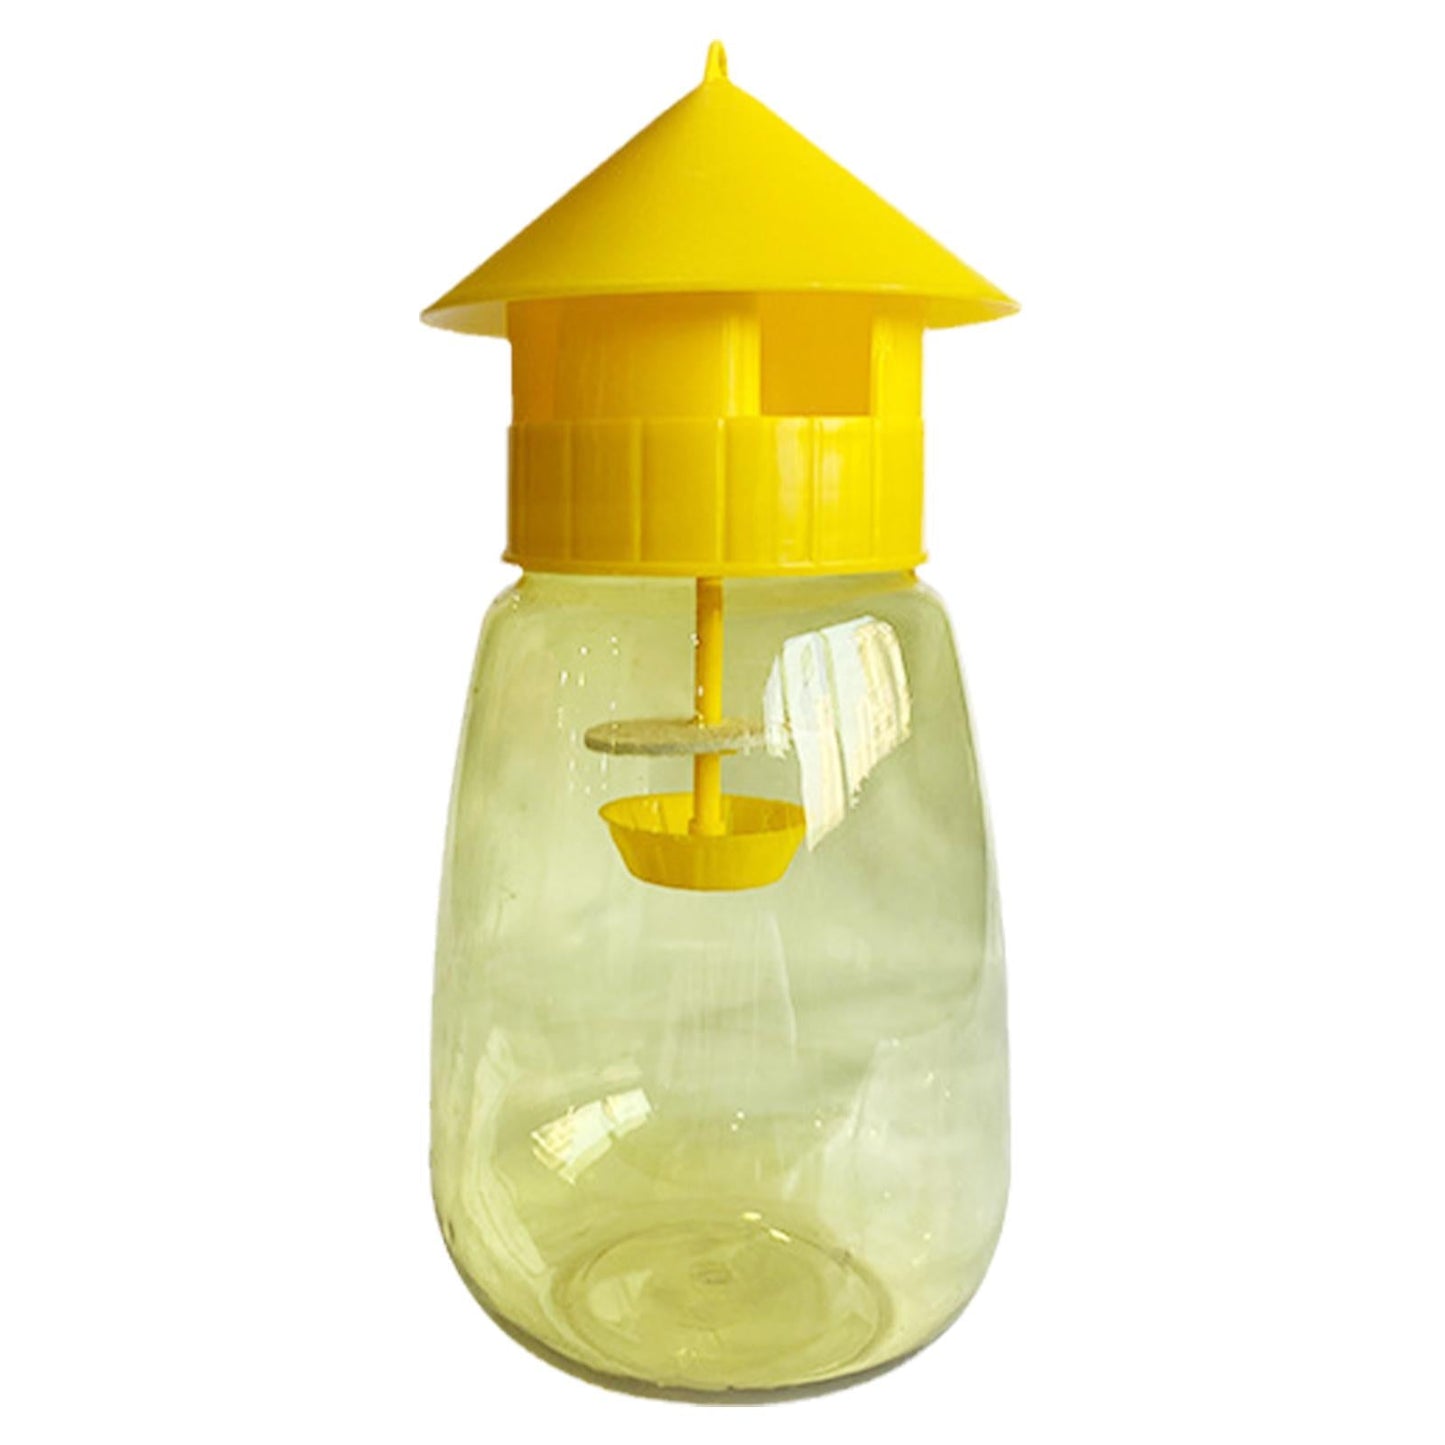 Fruit Fly Trap Killer Yellow Plastic Drosophila Trap Anti Fly Fruit Fly killer Catcher Orchard Insect Trap Pest Control Products AChina Home & Garden > Household Supplies > Pest Control > Pest Control Traps 20.05 EZYSELLA SHOP